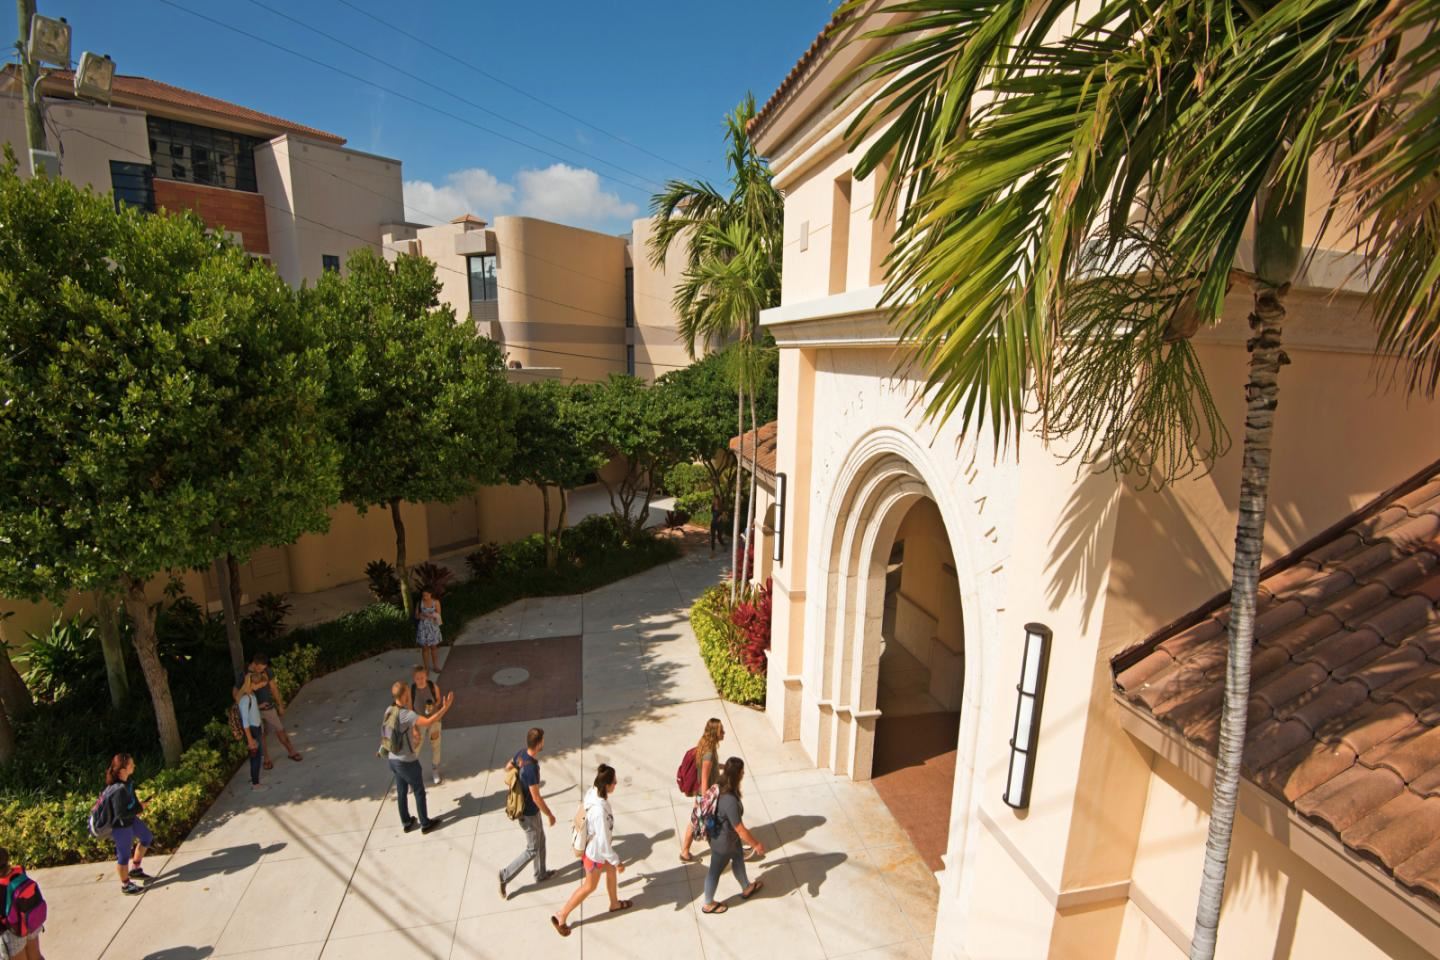 Christian Colleges in Florida - 10 Schools You Should Consider